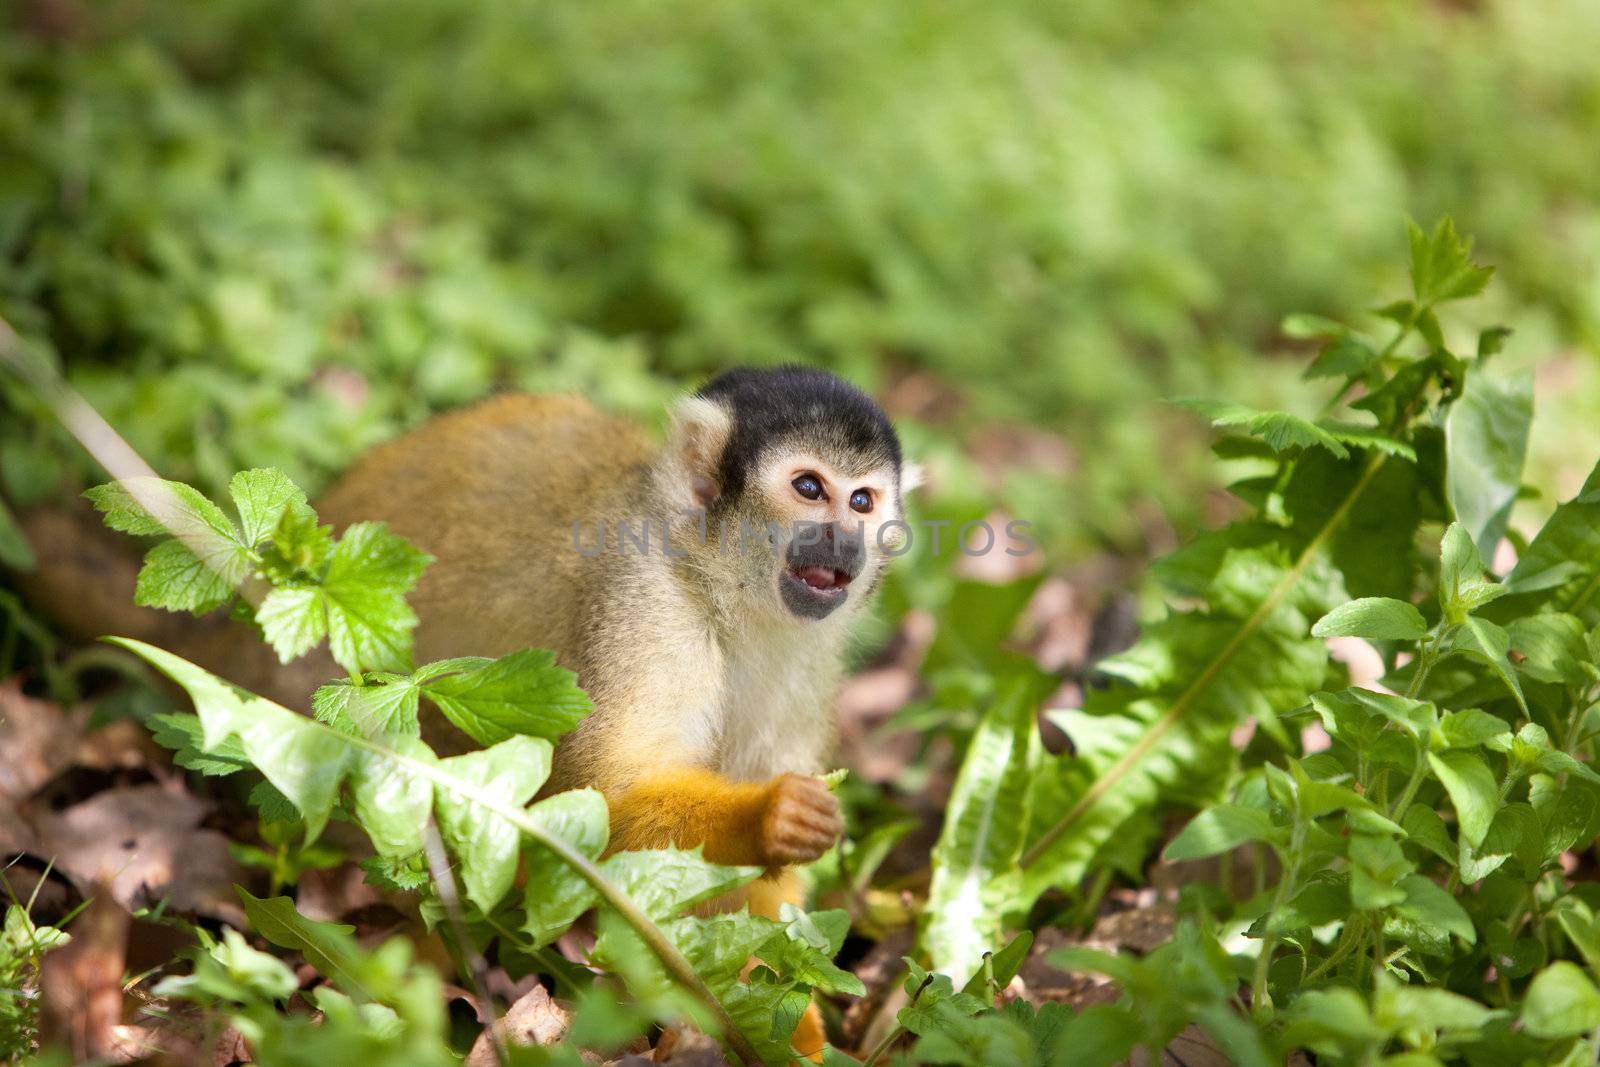 Cute little squirrel monkey looking for something to eat